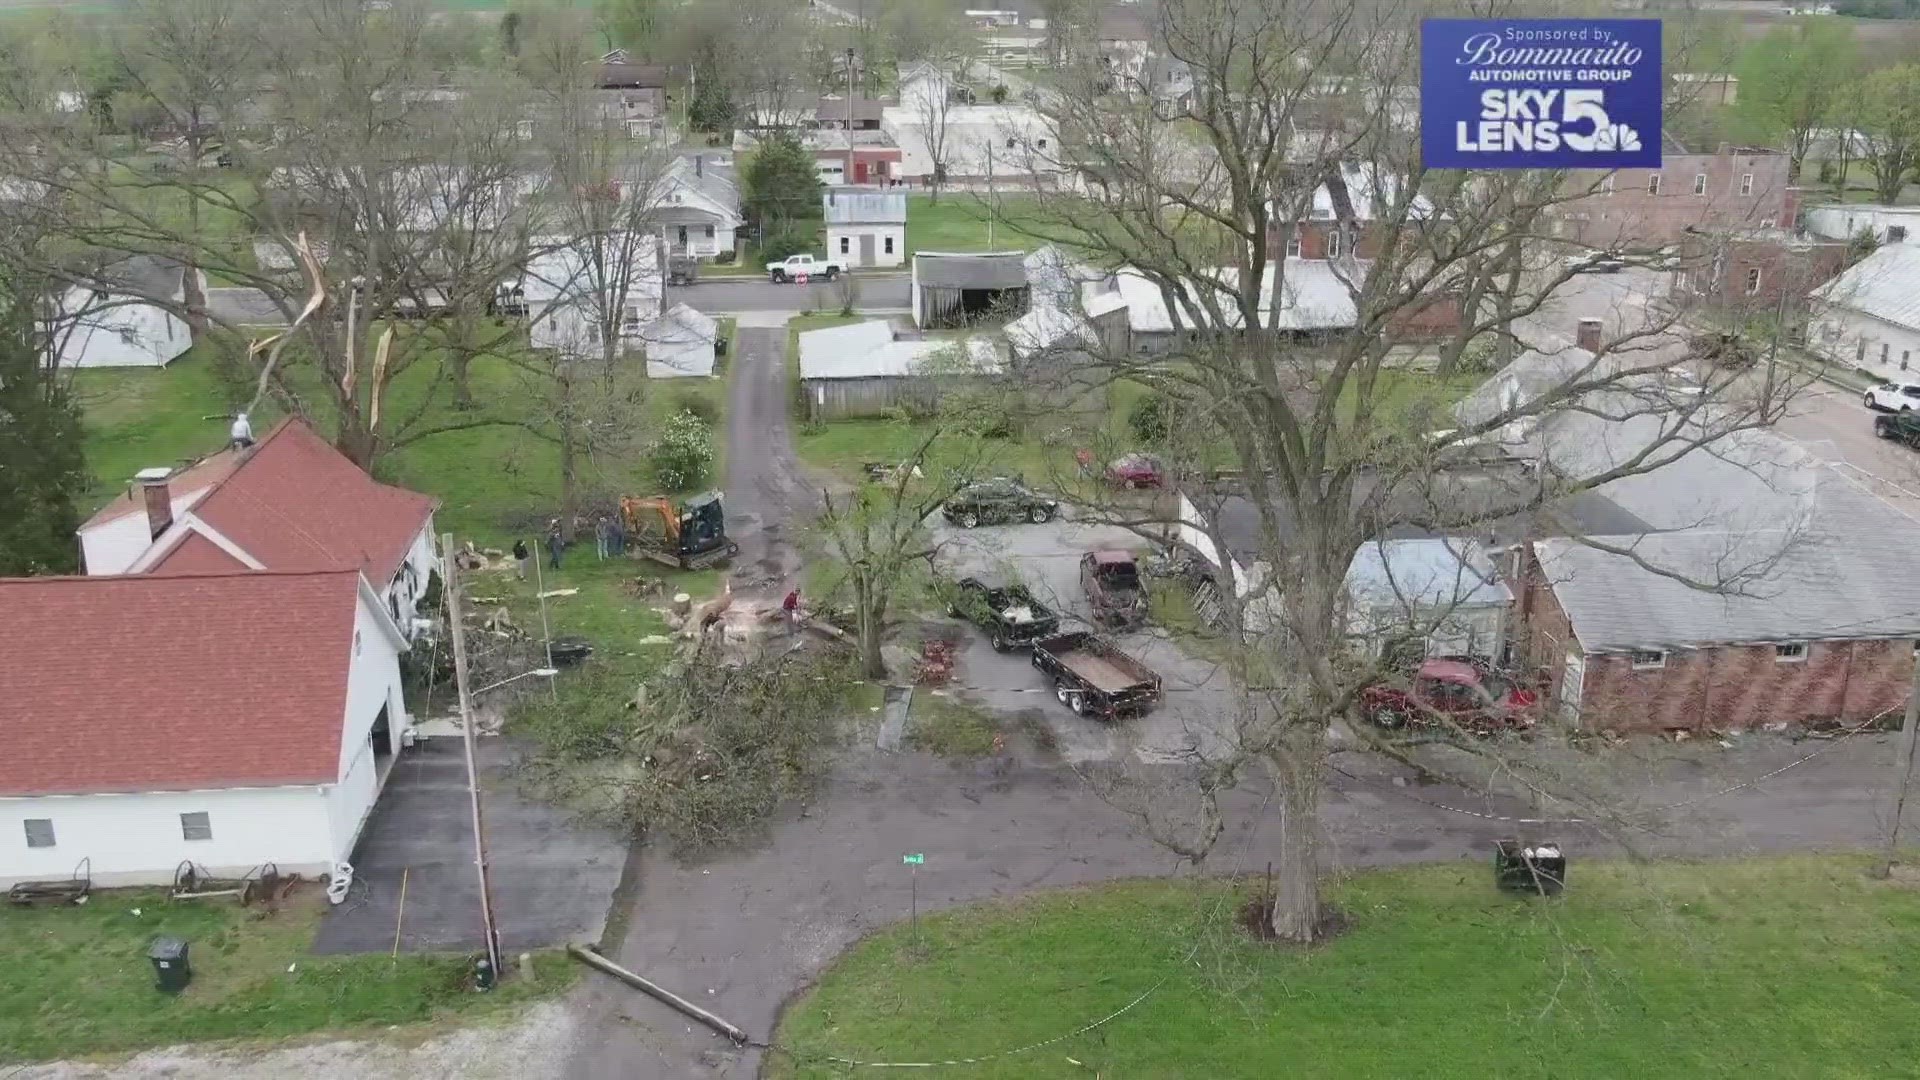 The Monroe County Public Safety Director said every community in the county was impacted by Saturday's storms, but Hecker got the worst of it.